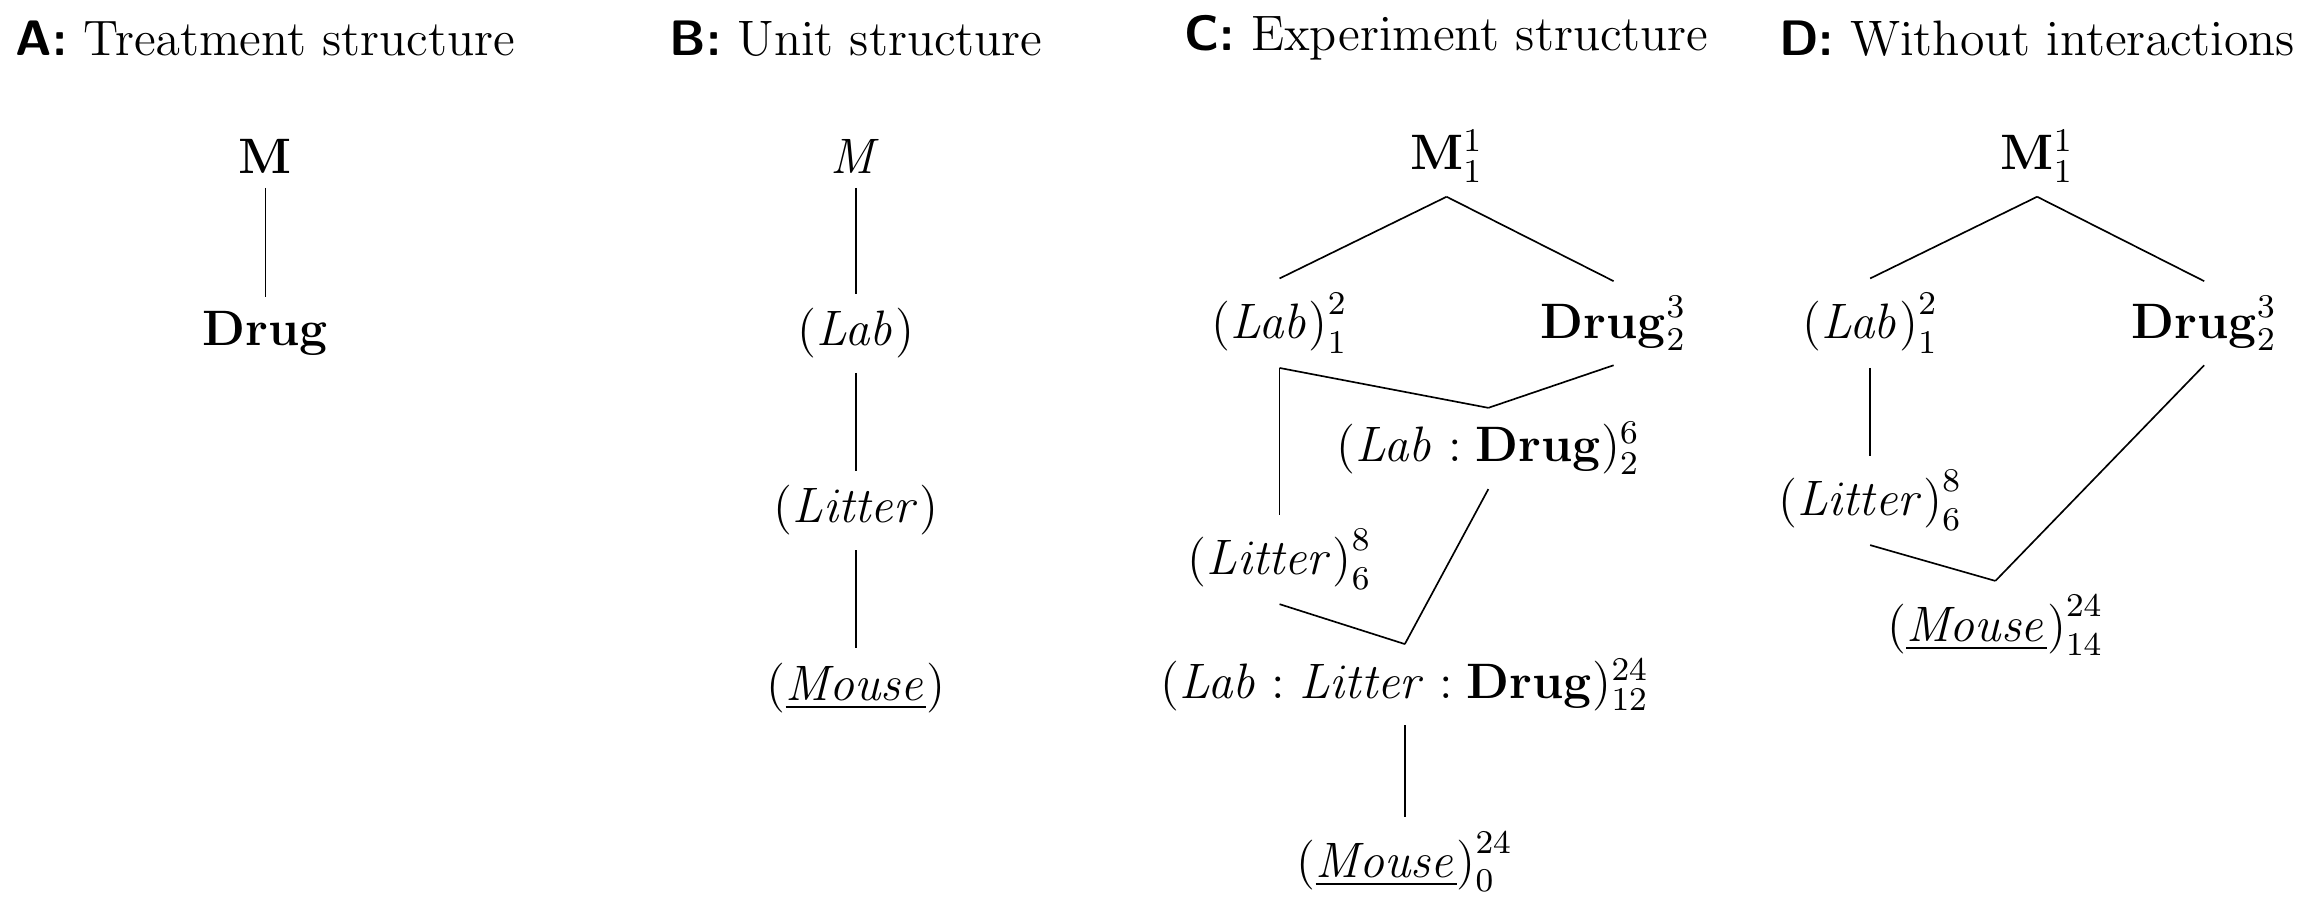 Randomized complete block design for determining effect of two different drugs and placebo treatments on enzyme levels in mice, replicated in two laboratories. A: Treatment structure. B: Unit structure with three nested factors. C: Full experiment structure with block-by-treatment interactions. D: Experiment structure if these interactions are negligible.